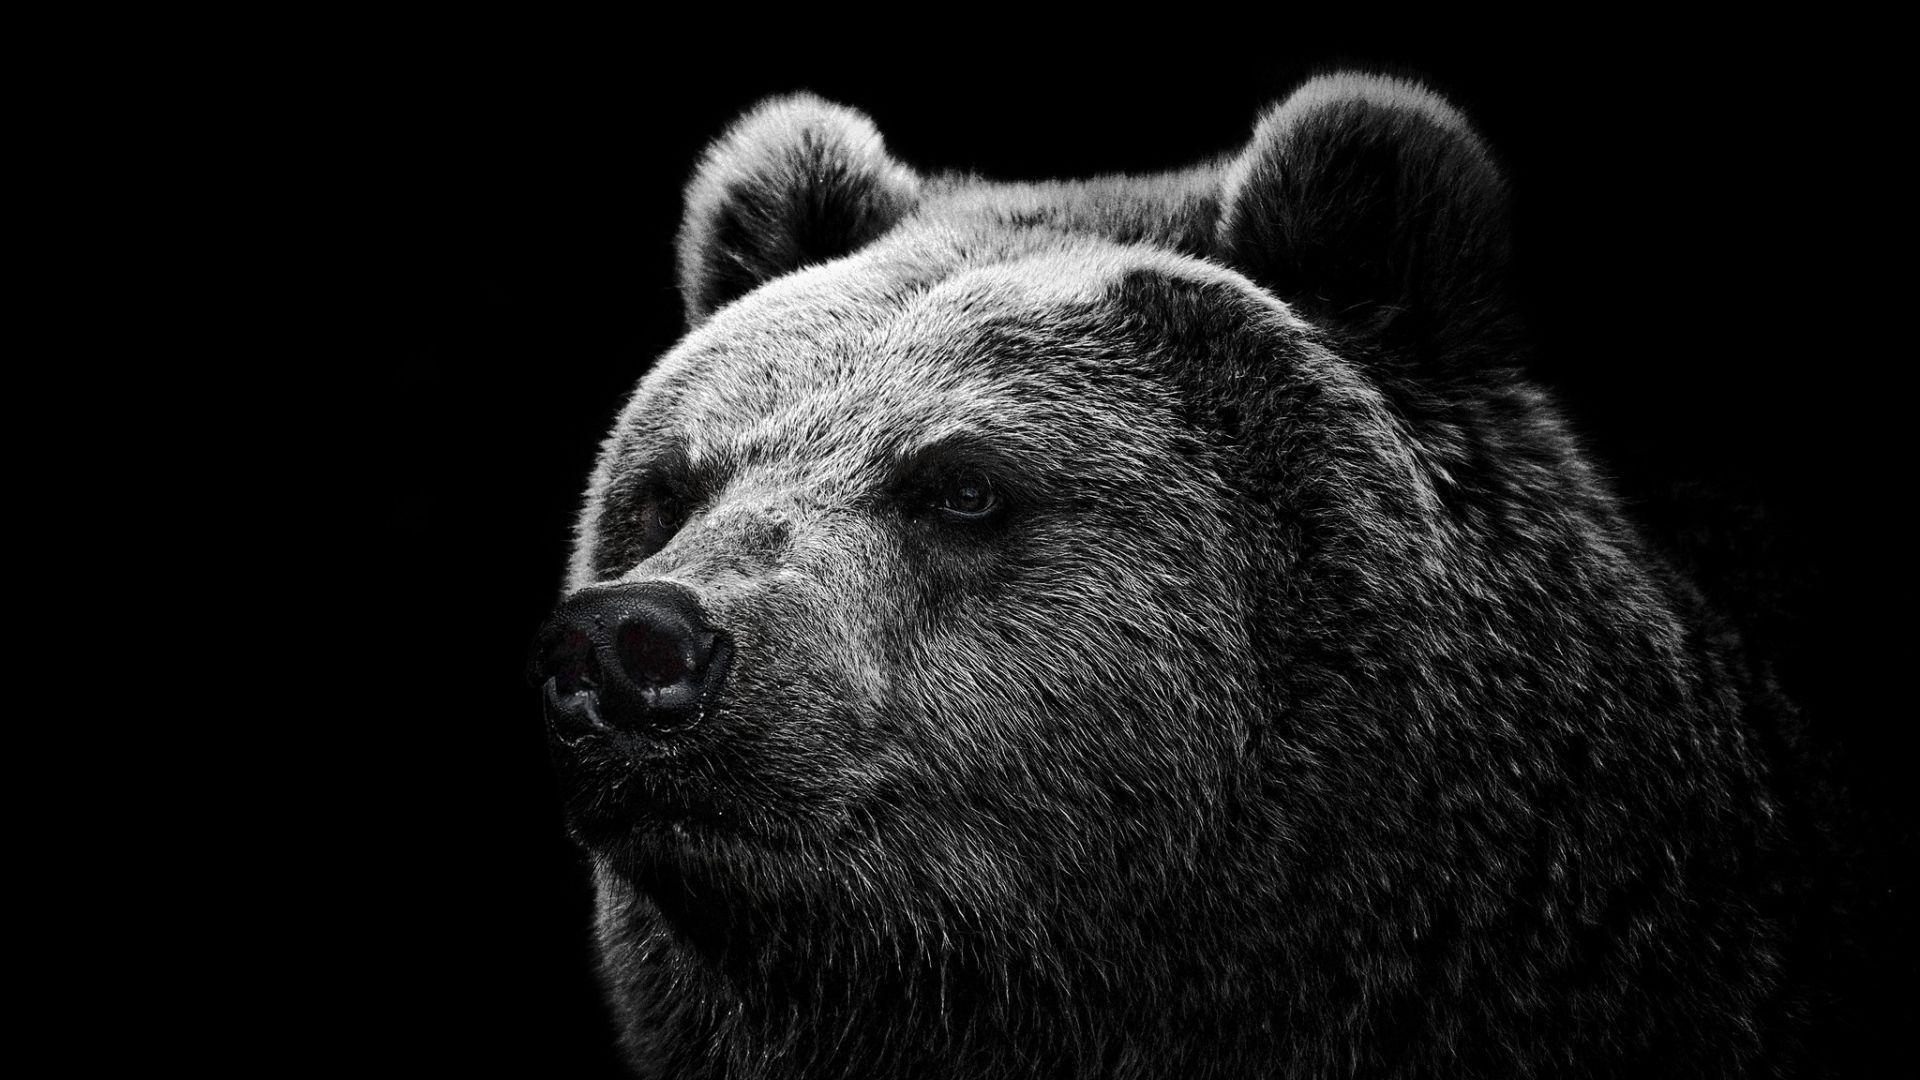 Hd Wallpaper Grizzly Bear Wallpaper Wild Big Grizzly 1280 X 960